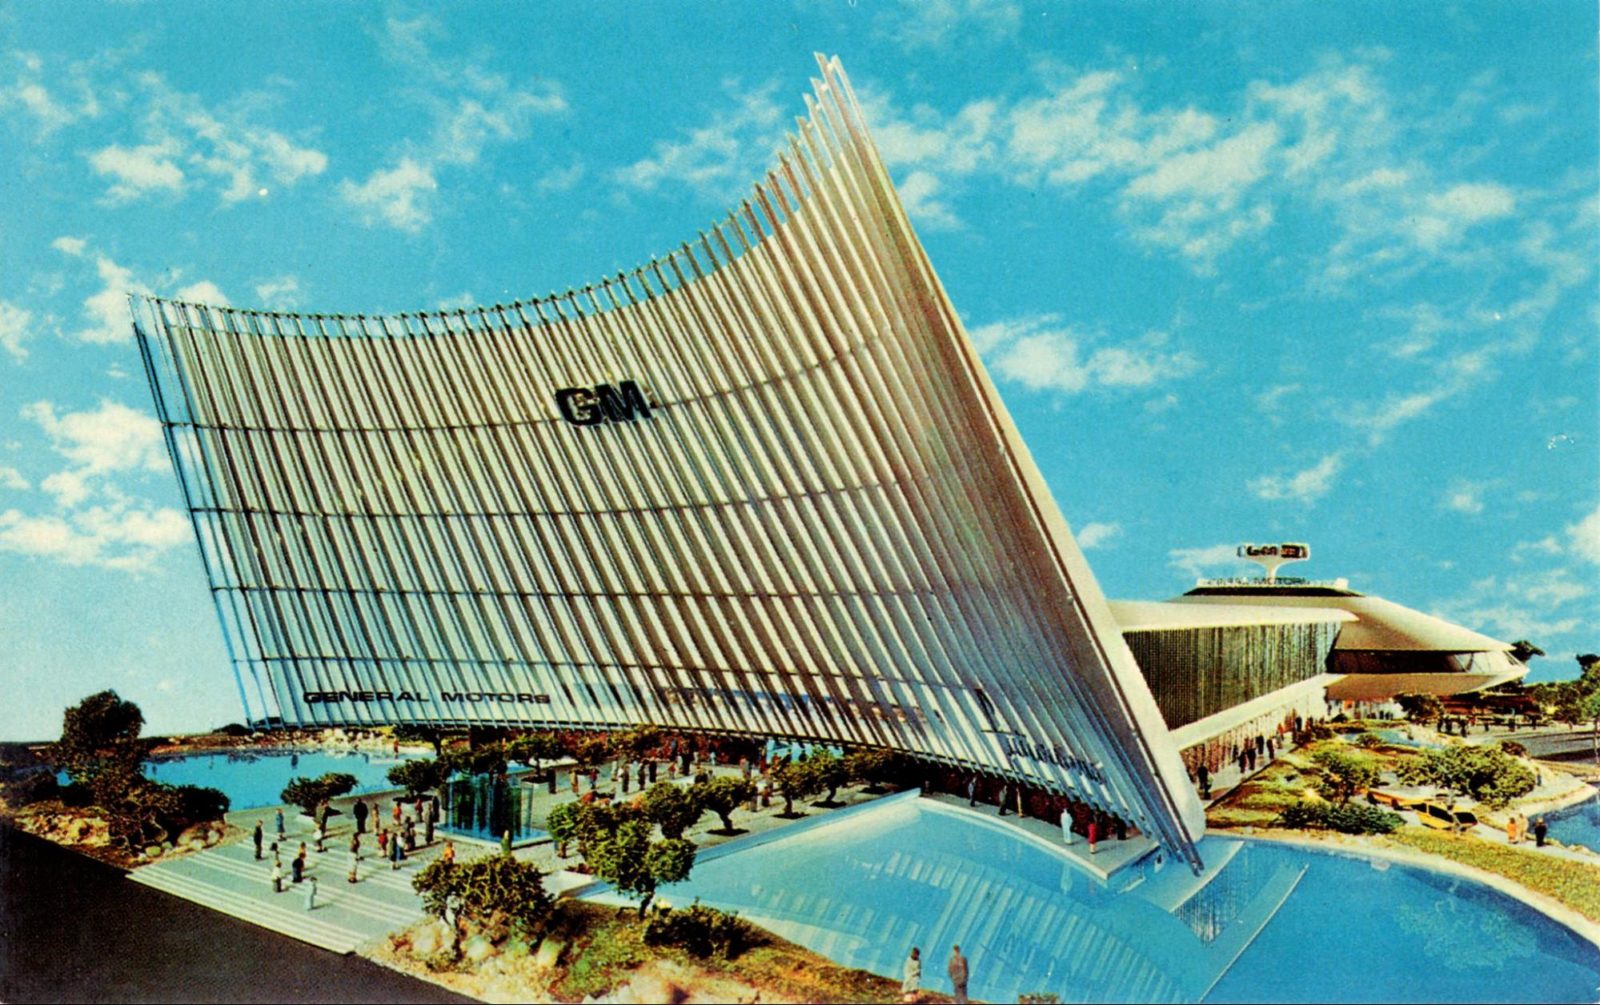 General Motors’ very own pavilion at the 1964 World’s Fair